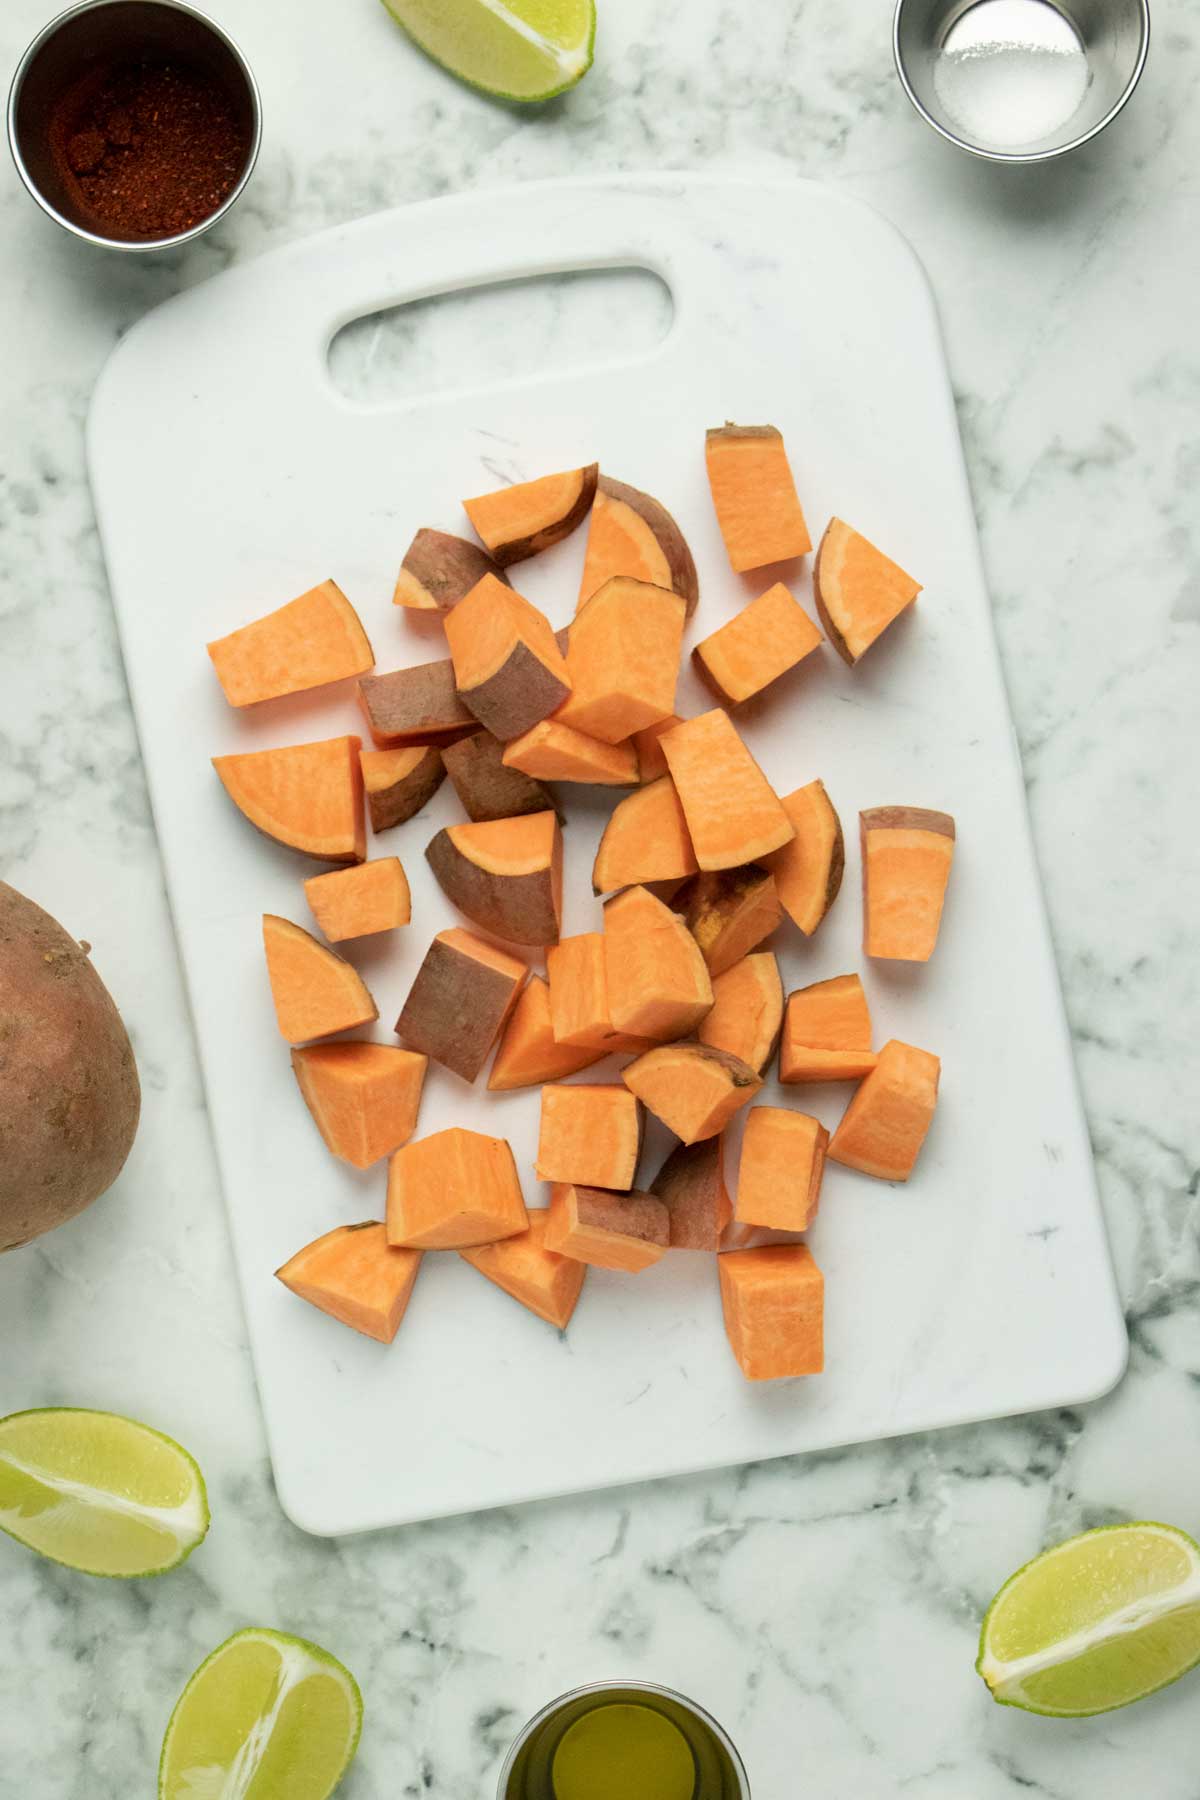 cubed sweet potato on a cutting board